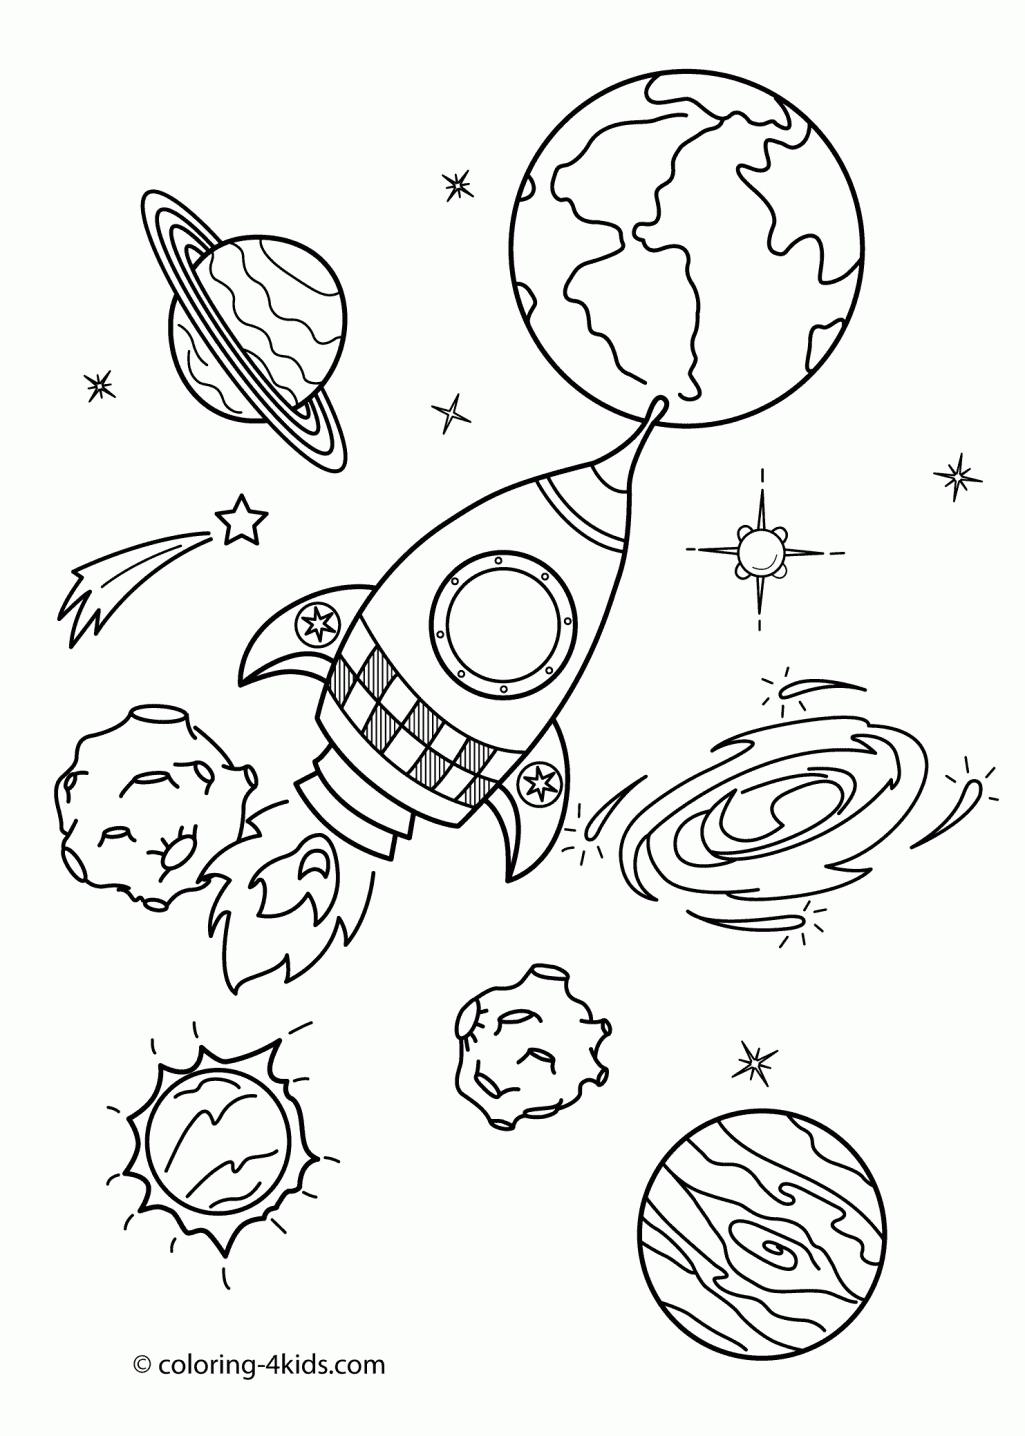 Sagacious Outer Space Colouring Pages Sinceso That Space Coloring 